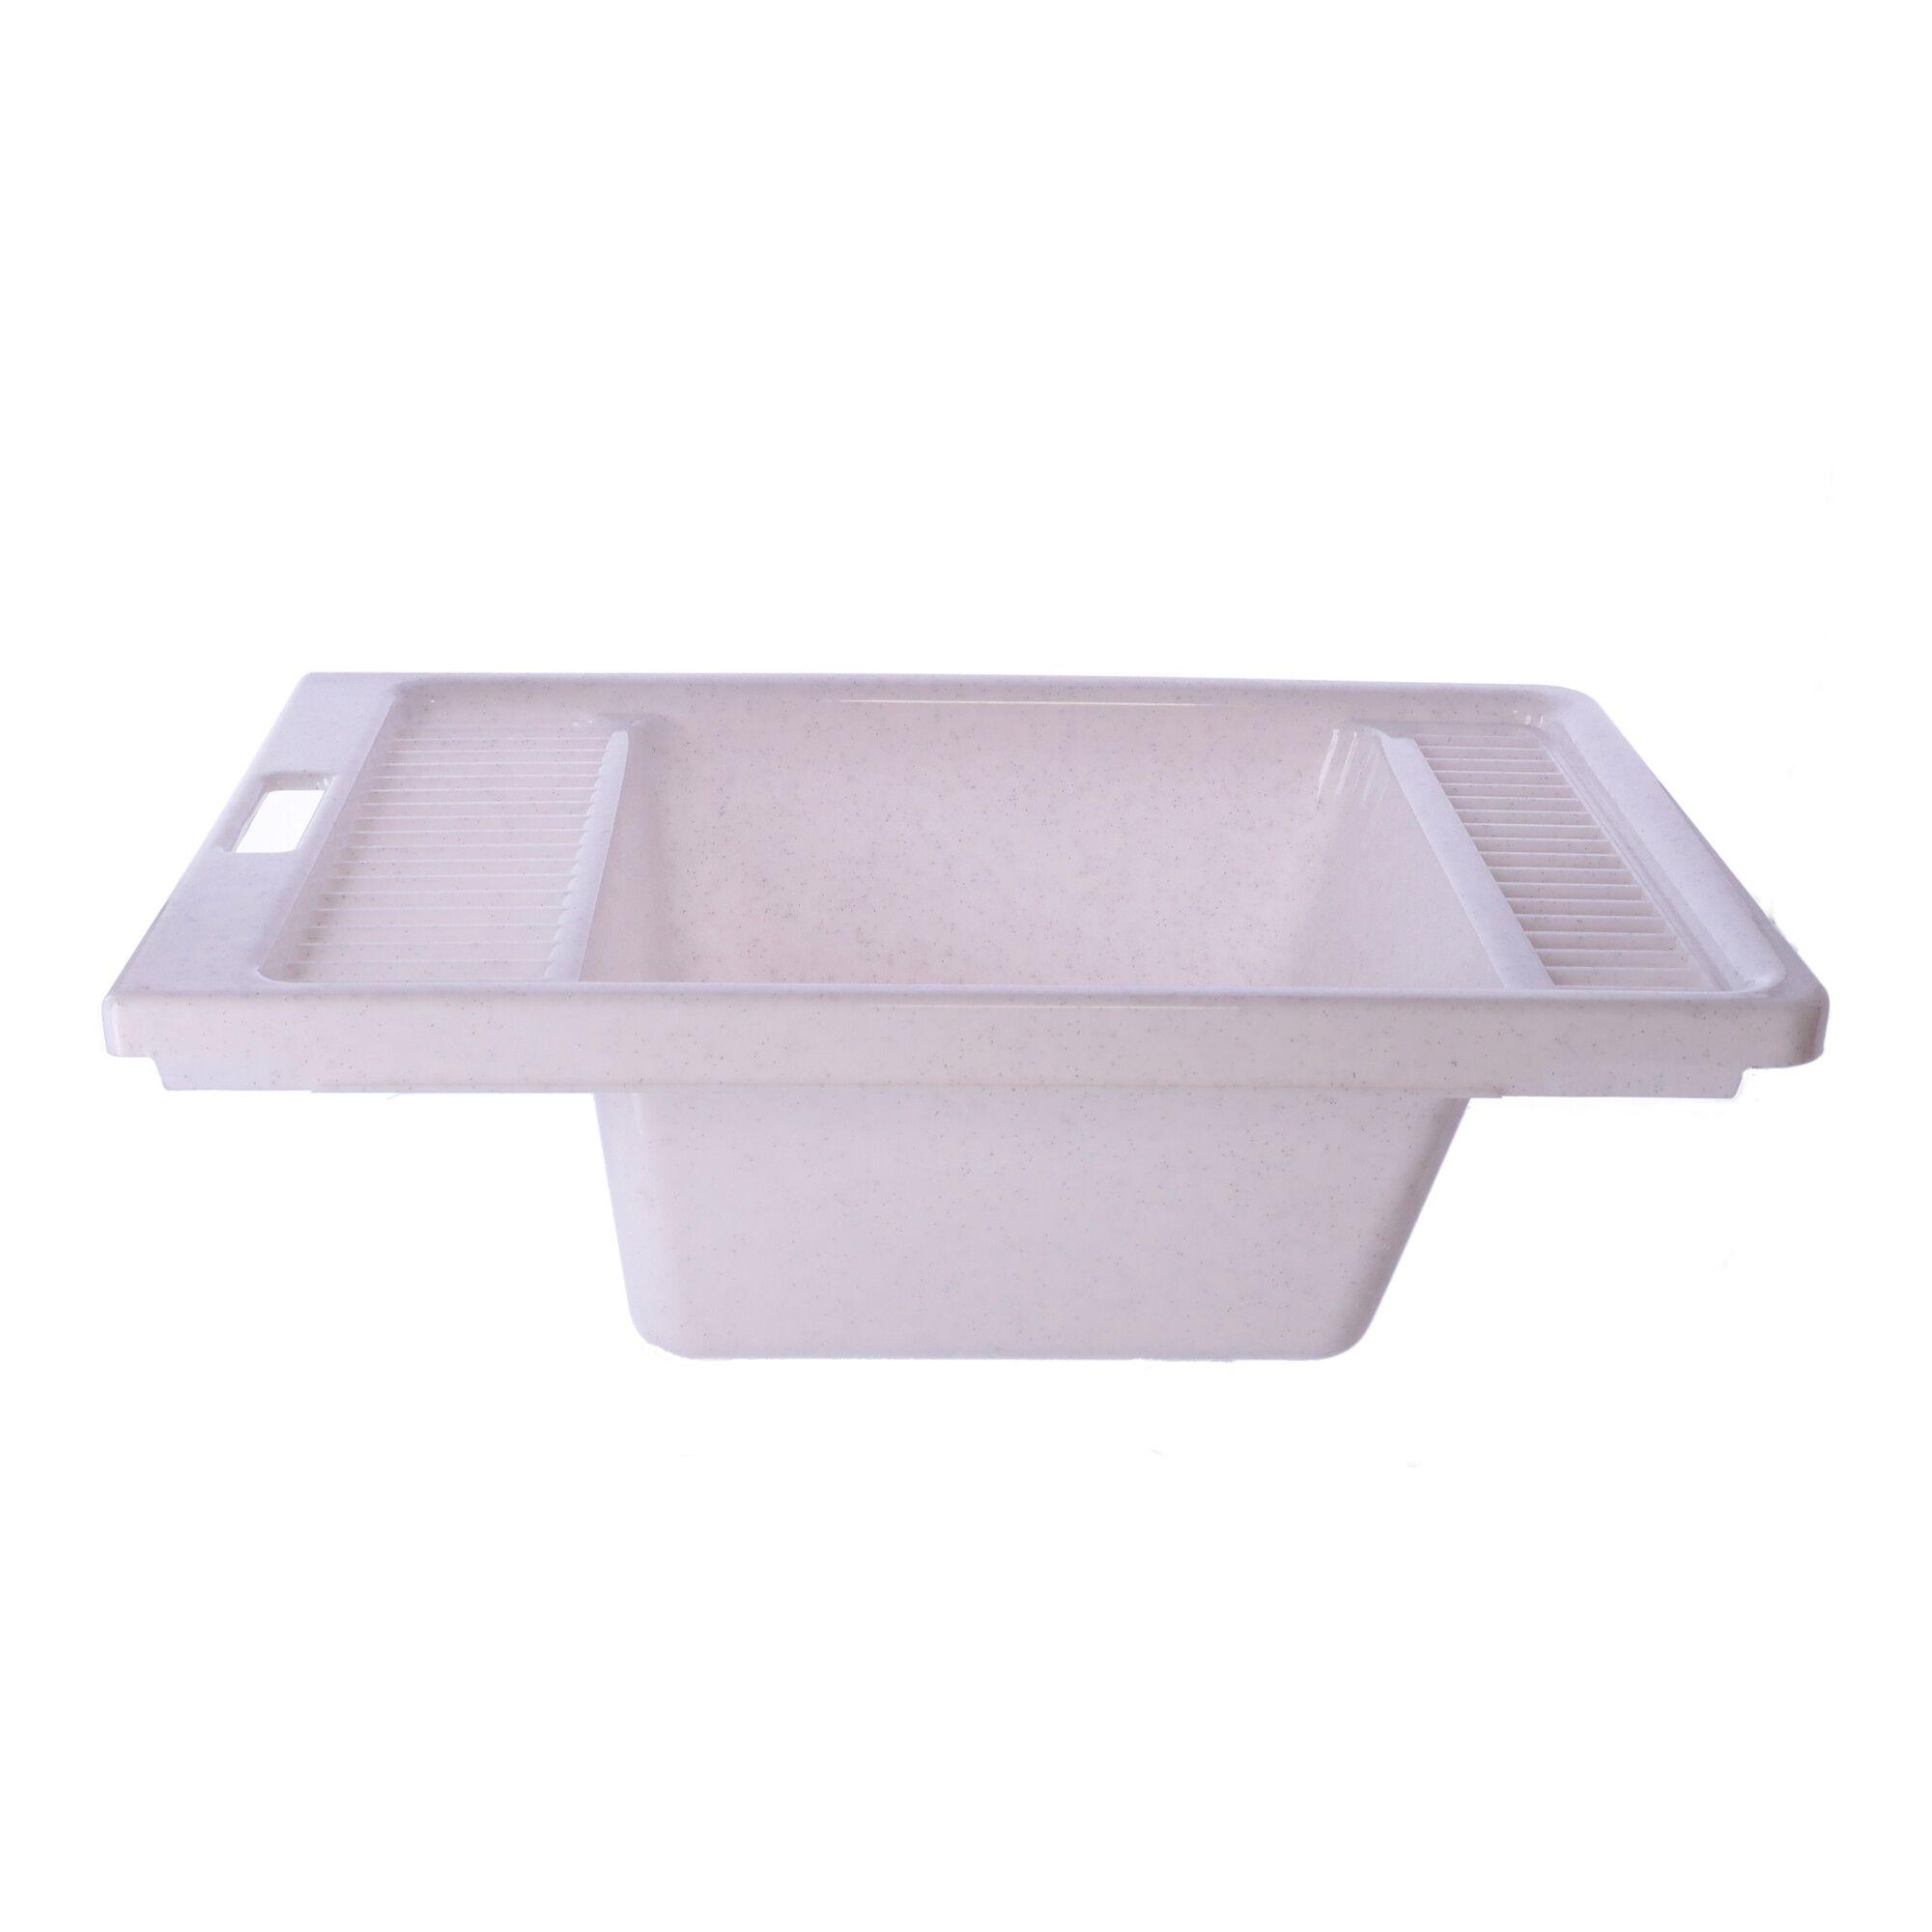 Bath bowl with stopper, POLISH PRODUCT - white